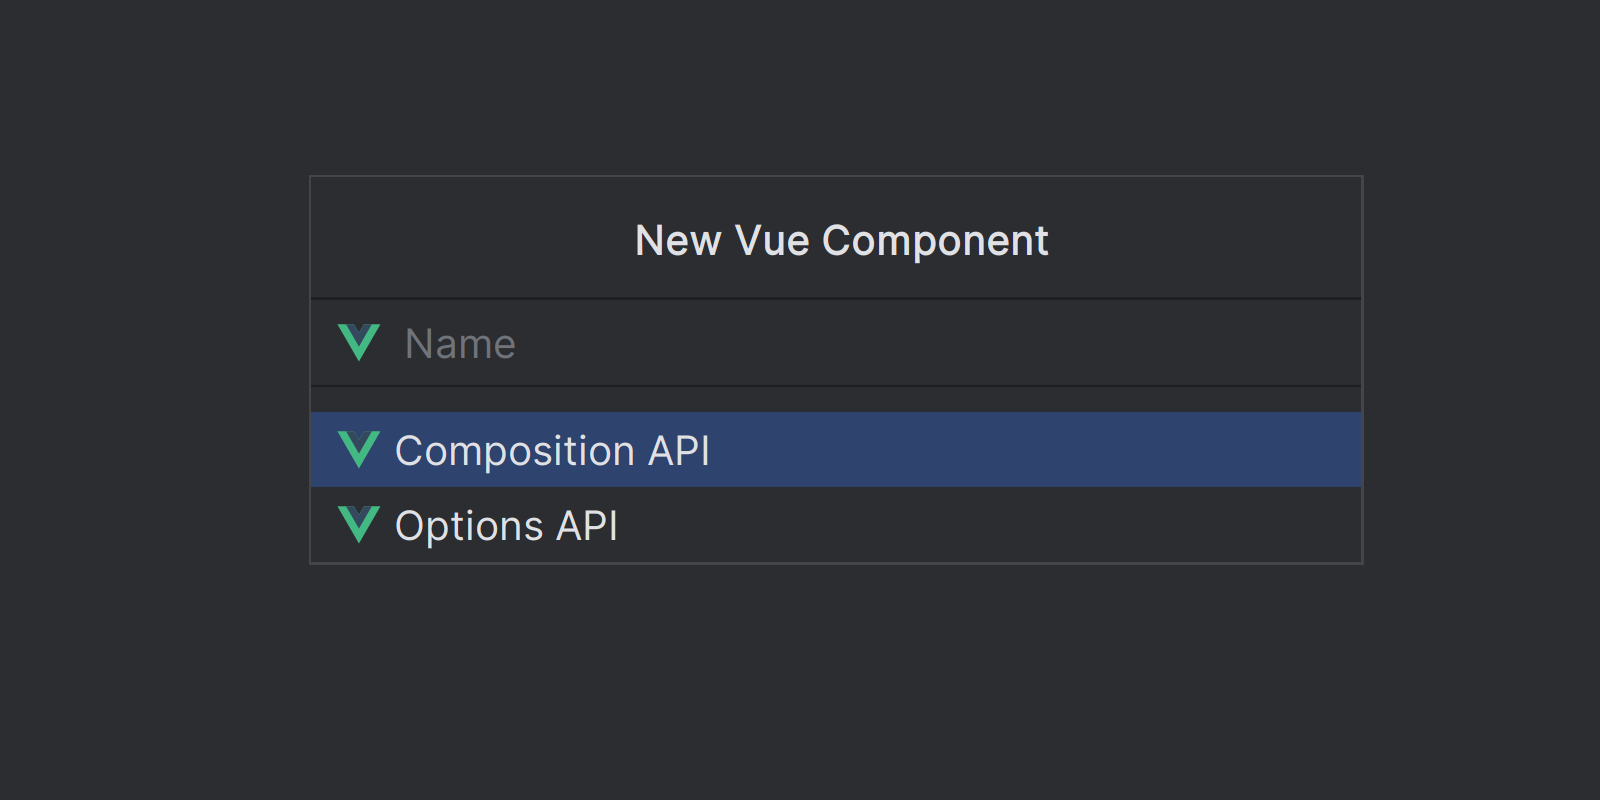 New Vue Component options showinf Composition and Options API